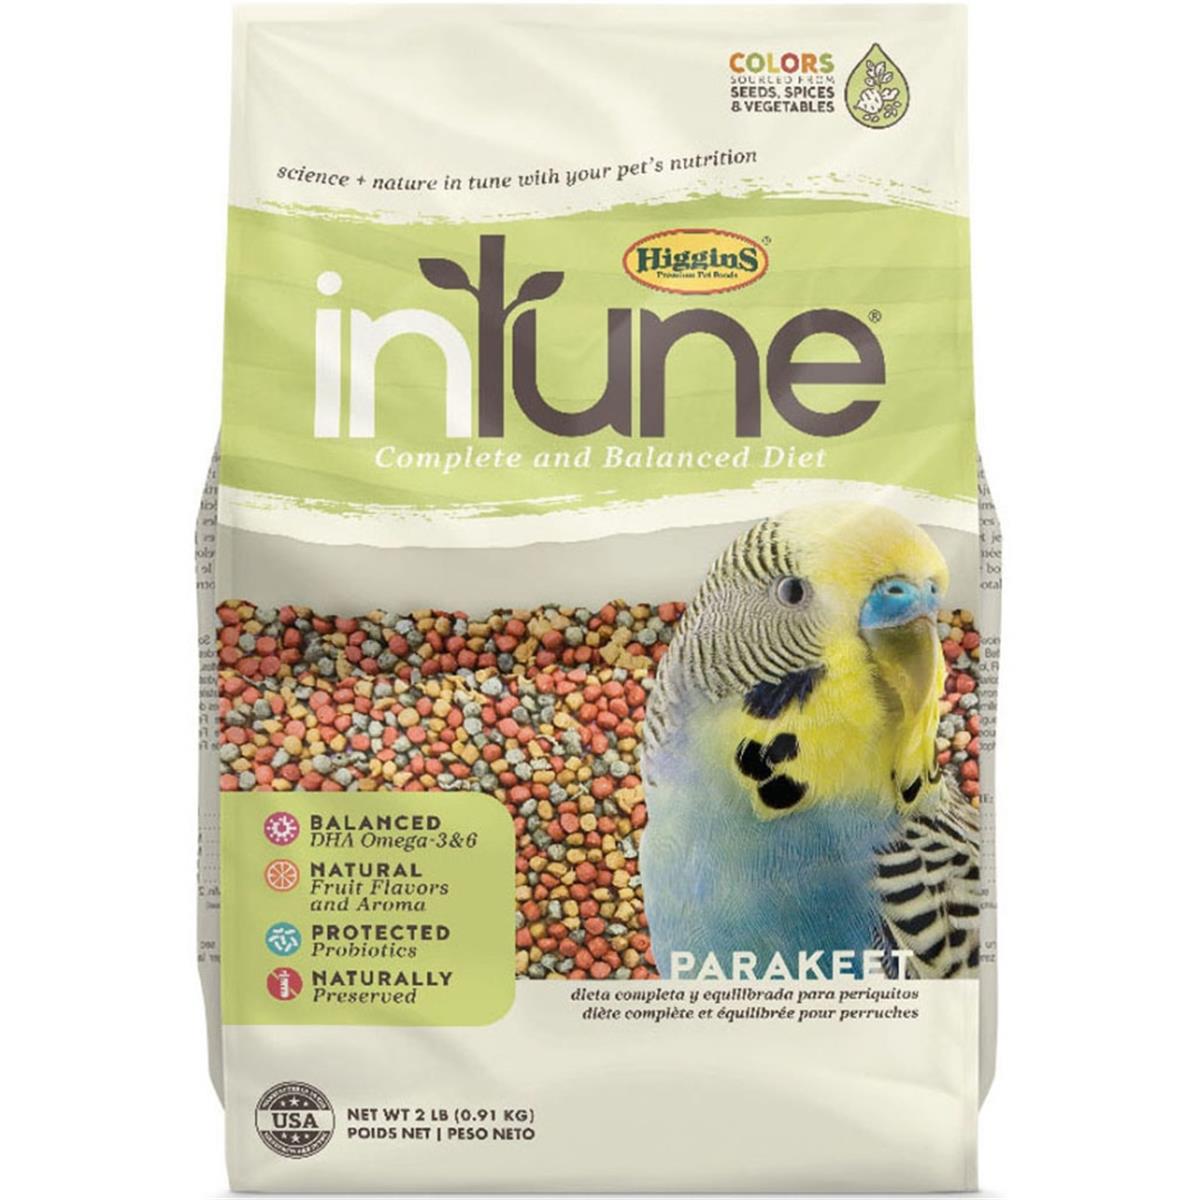 Hs30245 2 Lbs Intune Complete & Balanced Diet For Parakeet